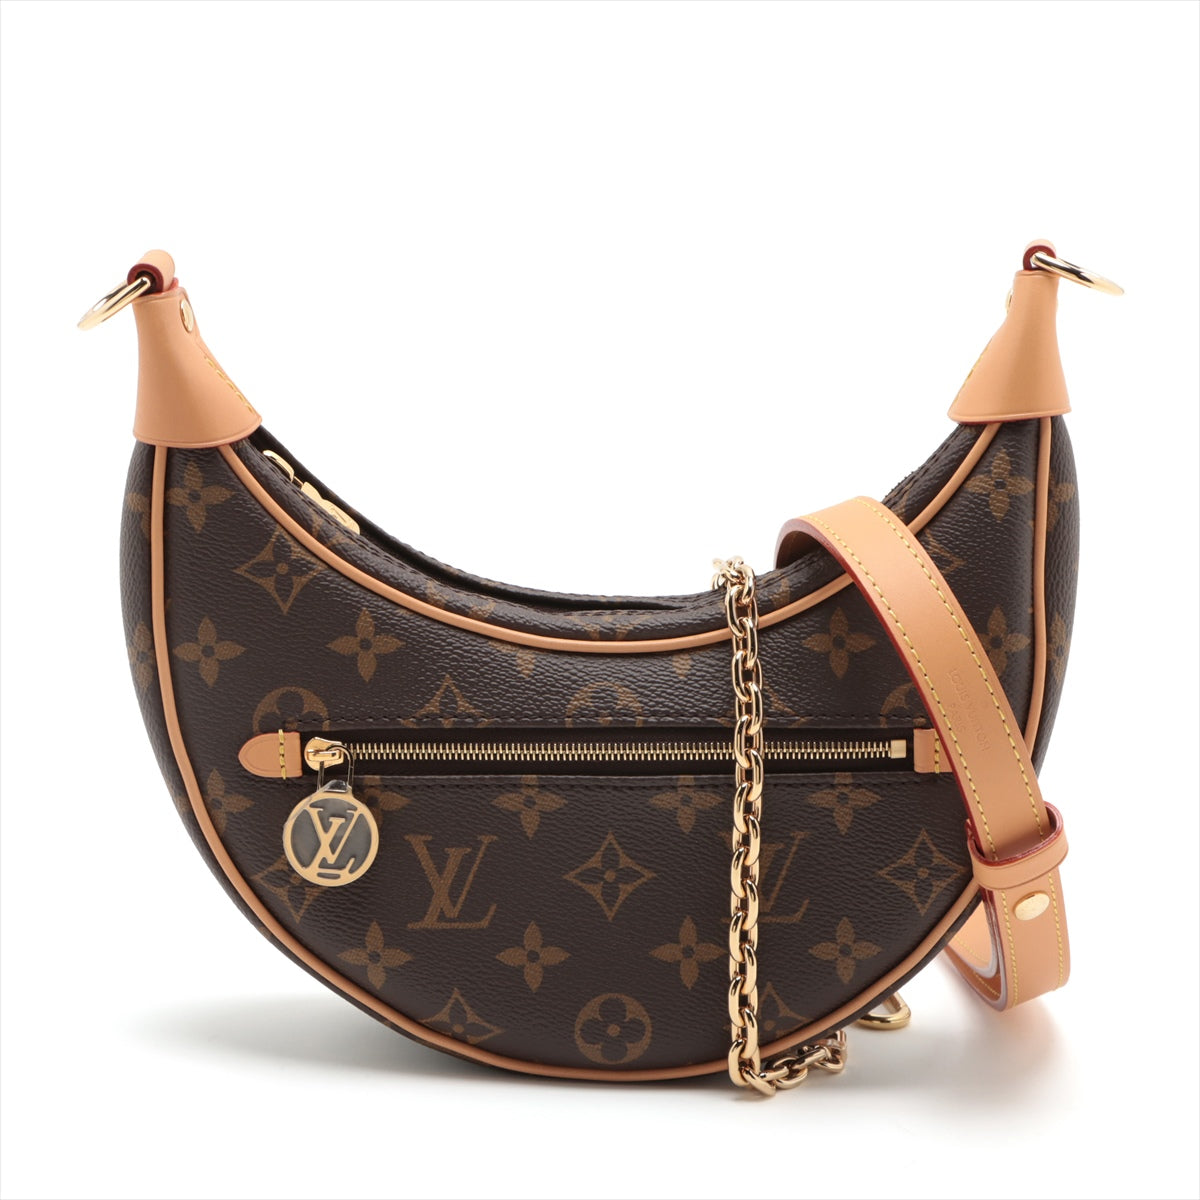 Louis Vuitton Monogram Loop M81098 There was an RFID response